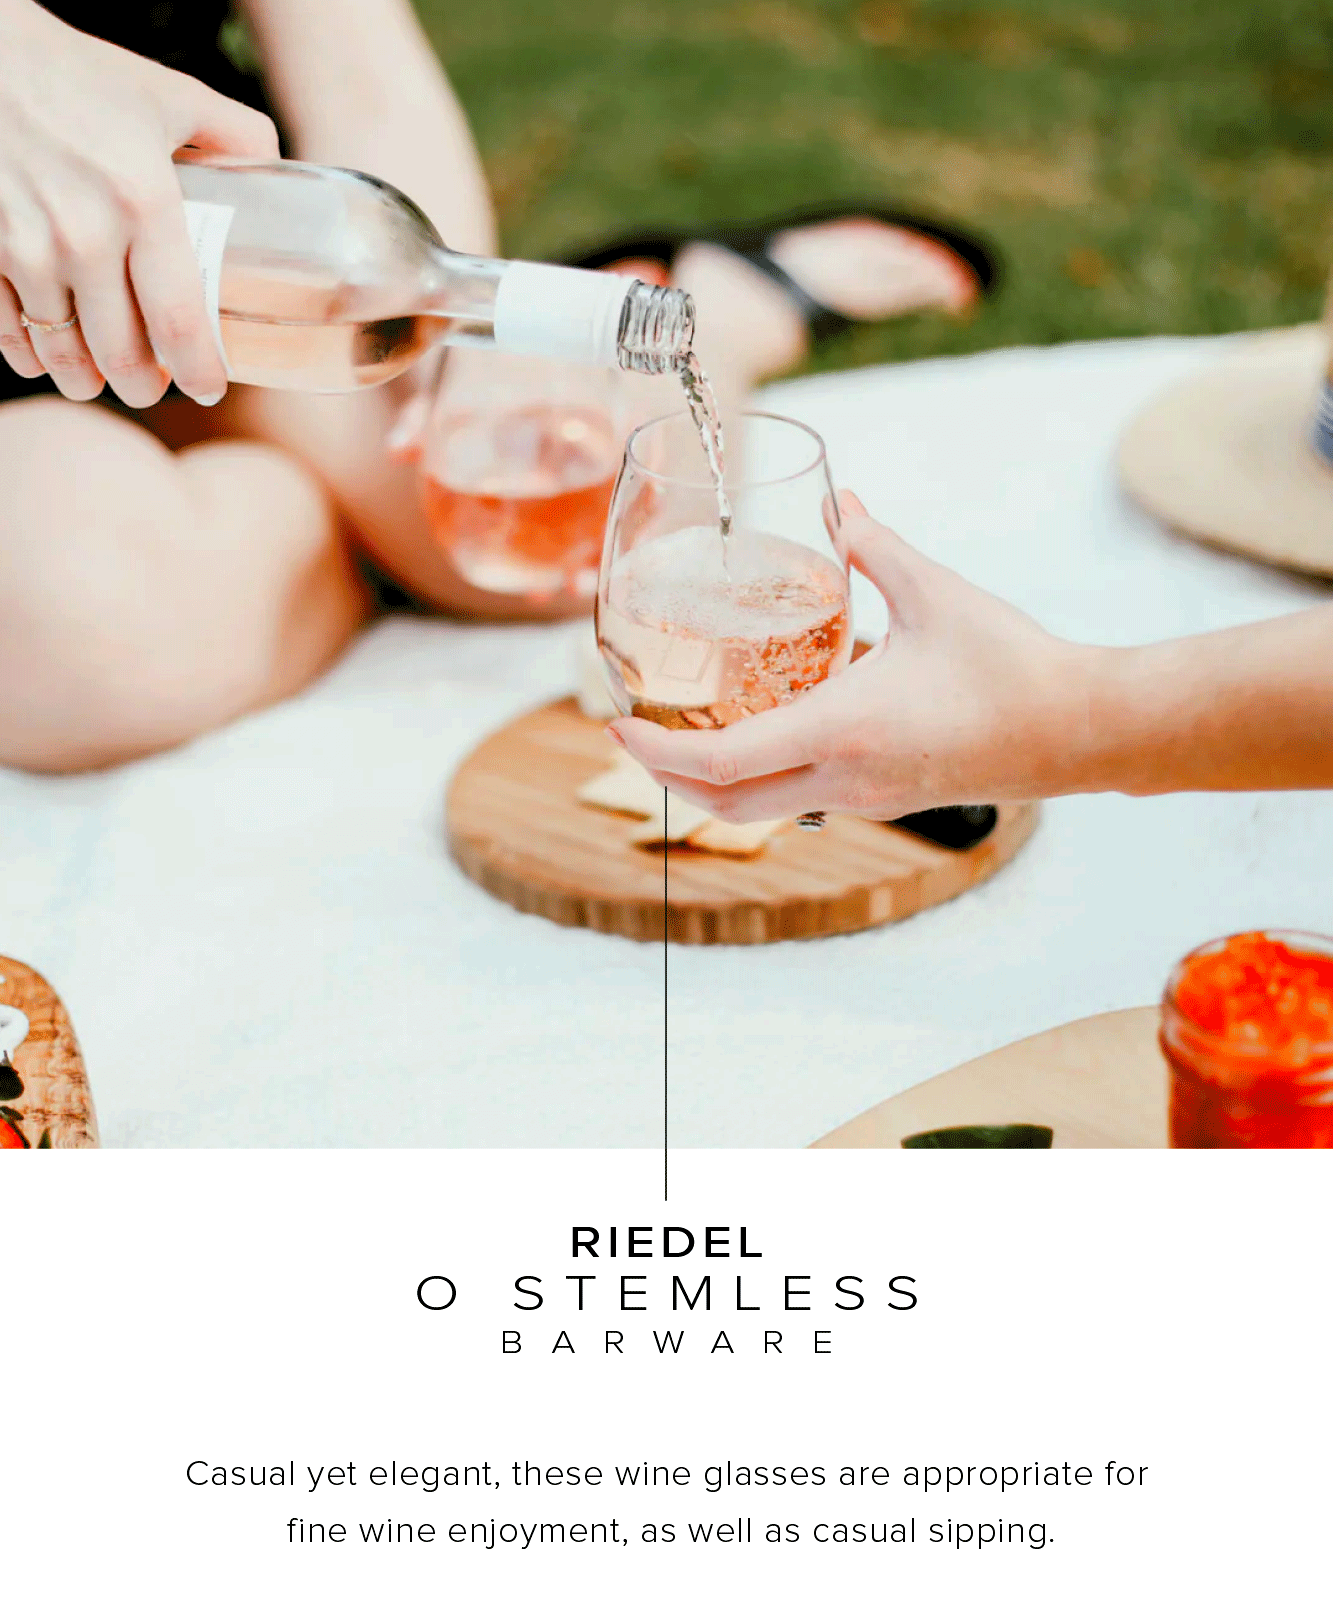  RIEDEL O STEMLESS B ARWARE Casual yet elegant, these wine glasses are appropriate for fine wine enjoyment, as well as casual sipping. 